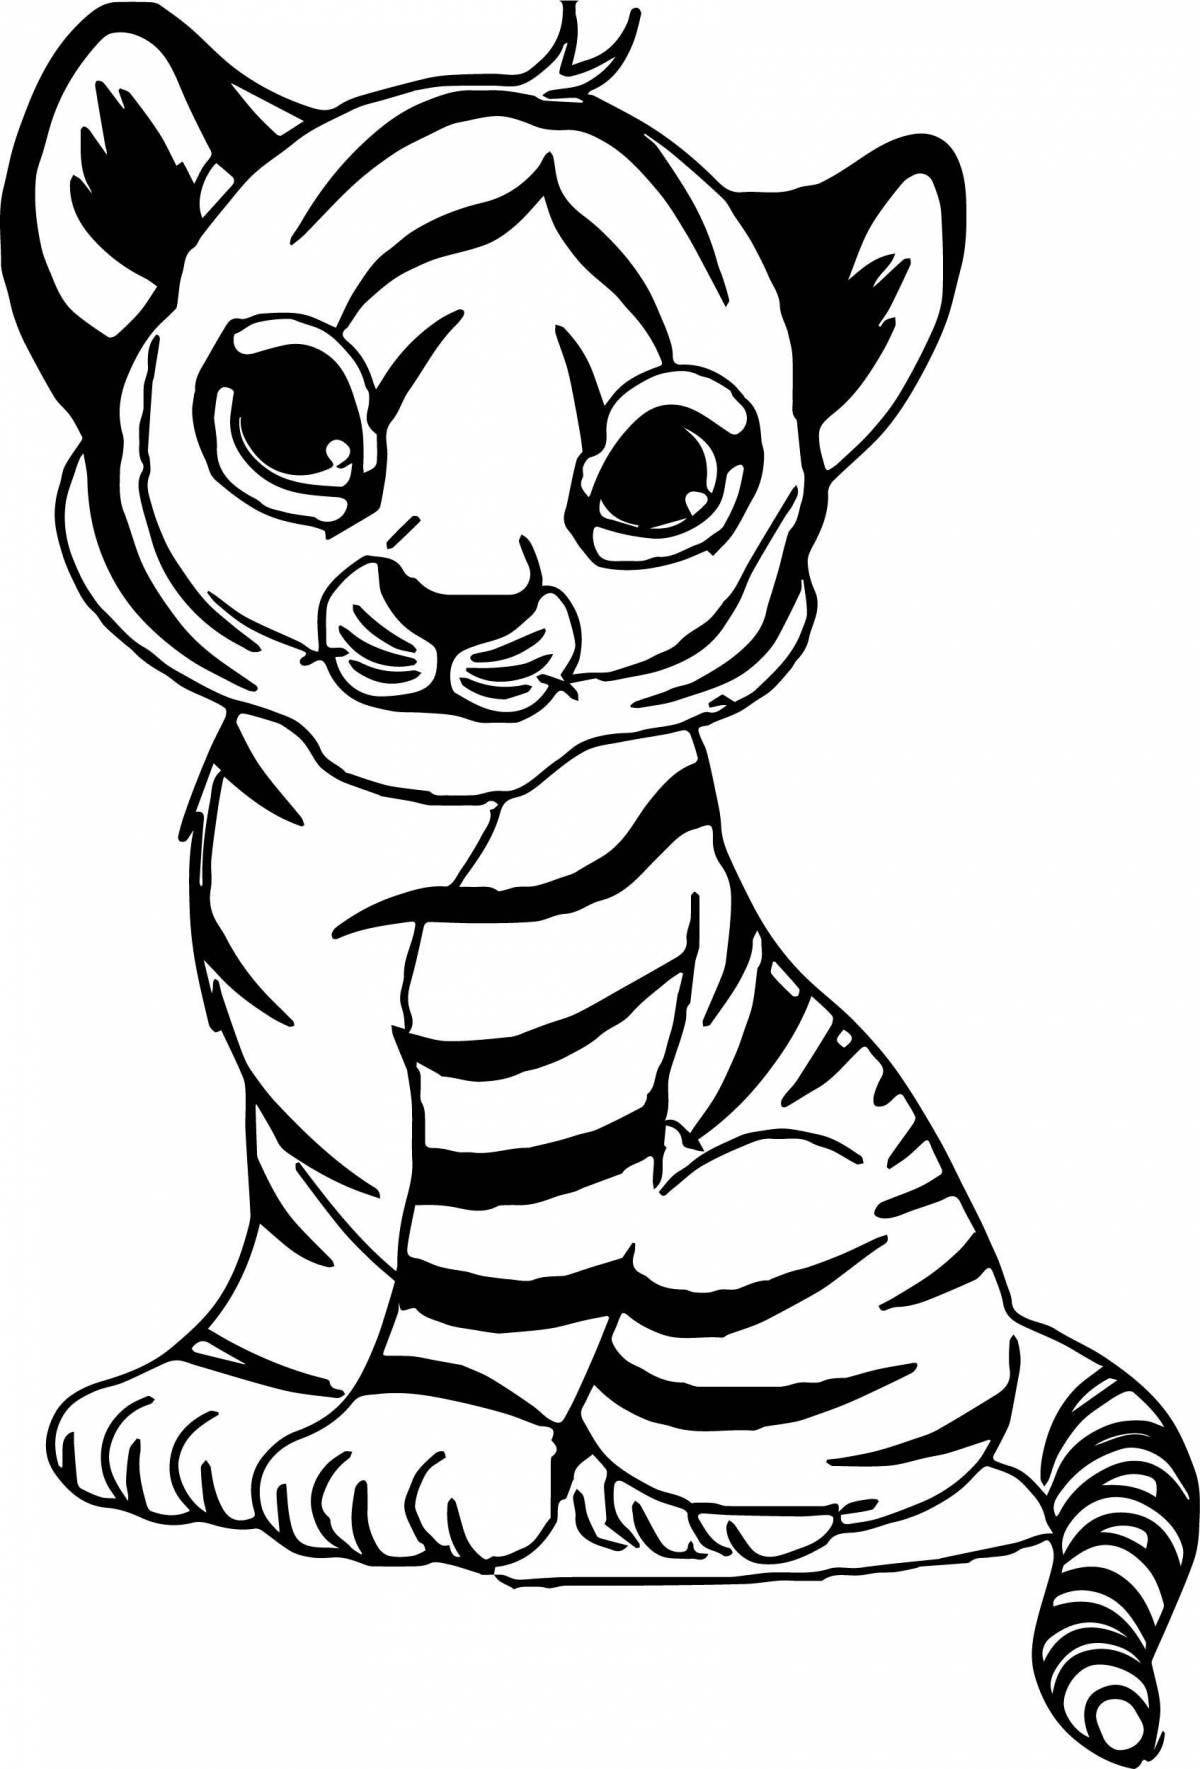 Coloring page blessed tigress with cub